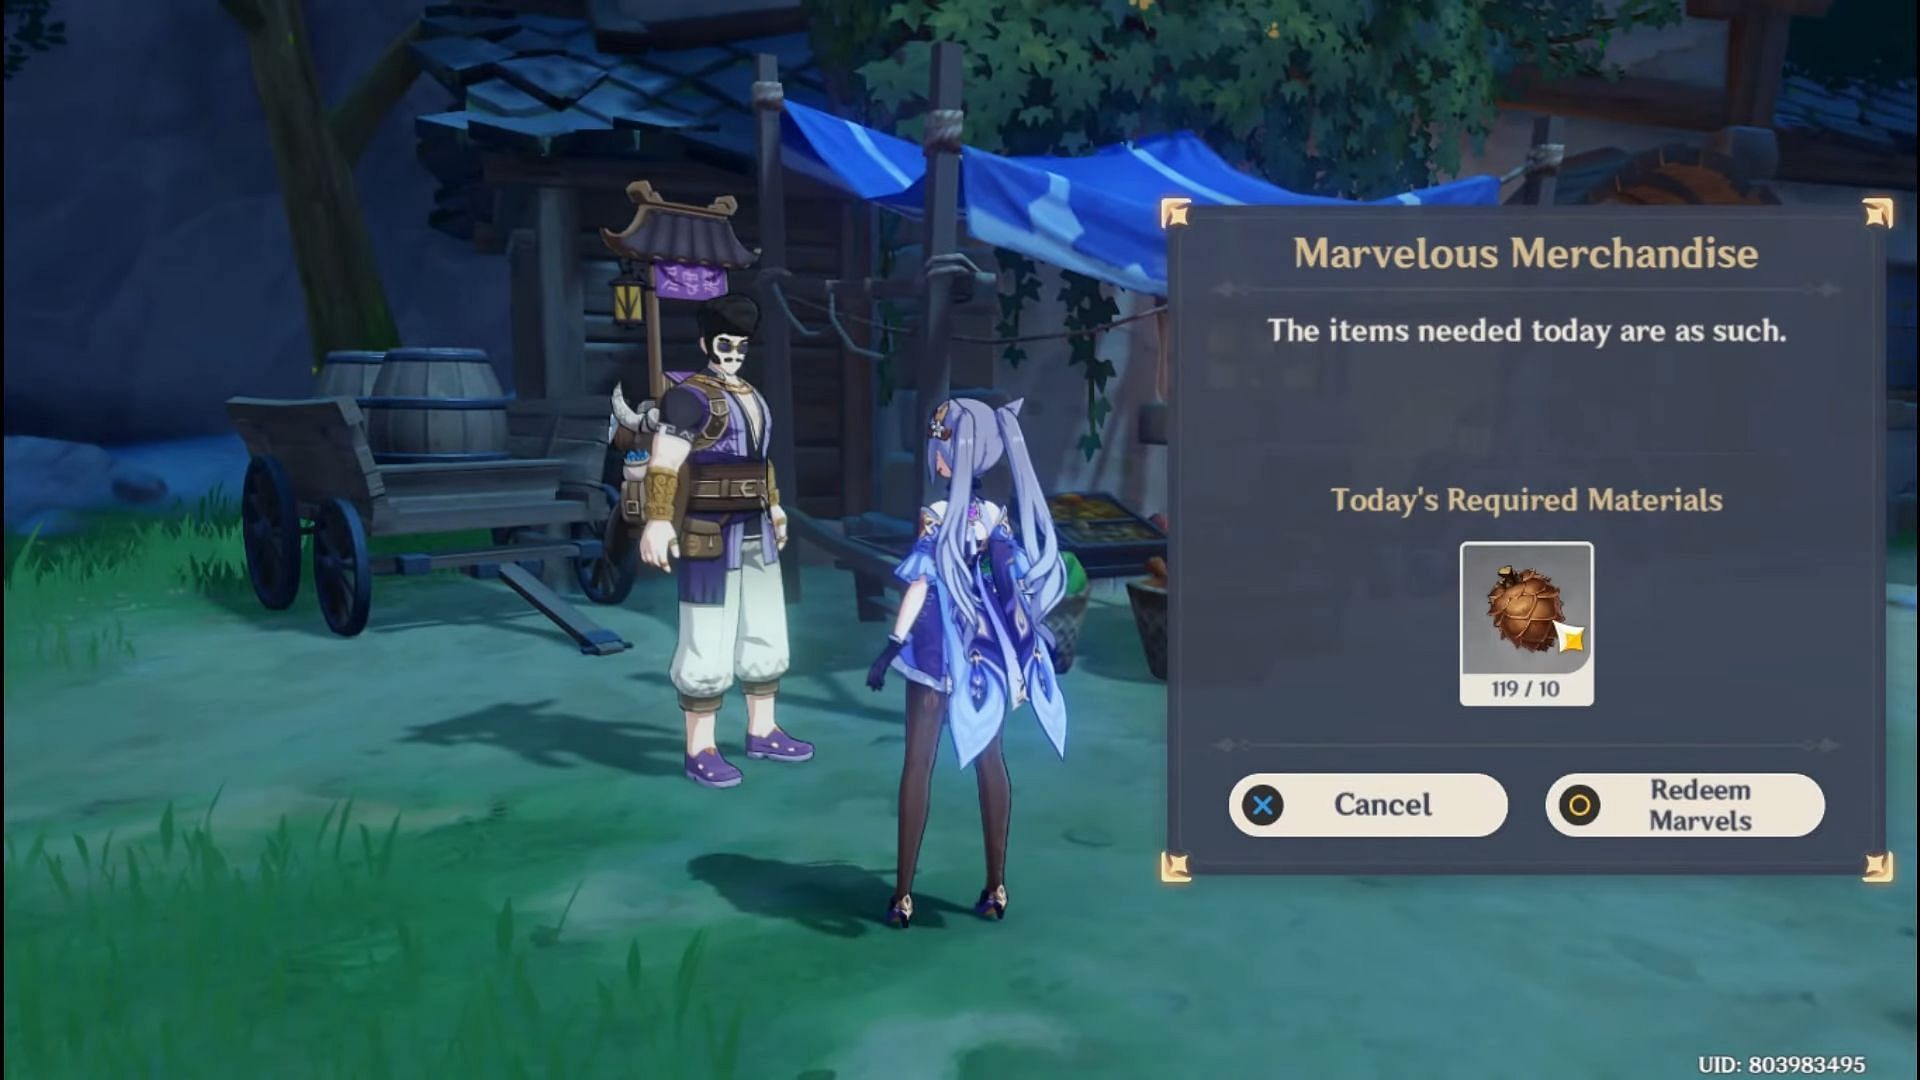 Exchanging items with Liben in Marvelous Merchandise (Image via guide4gamersdotcom/YouTube)